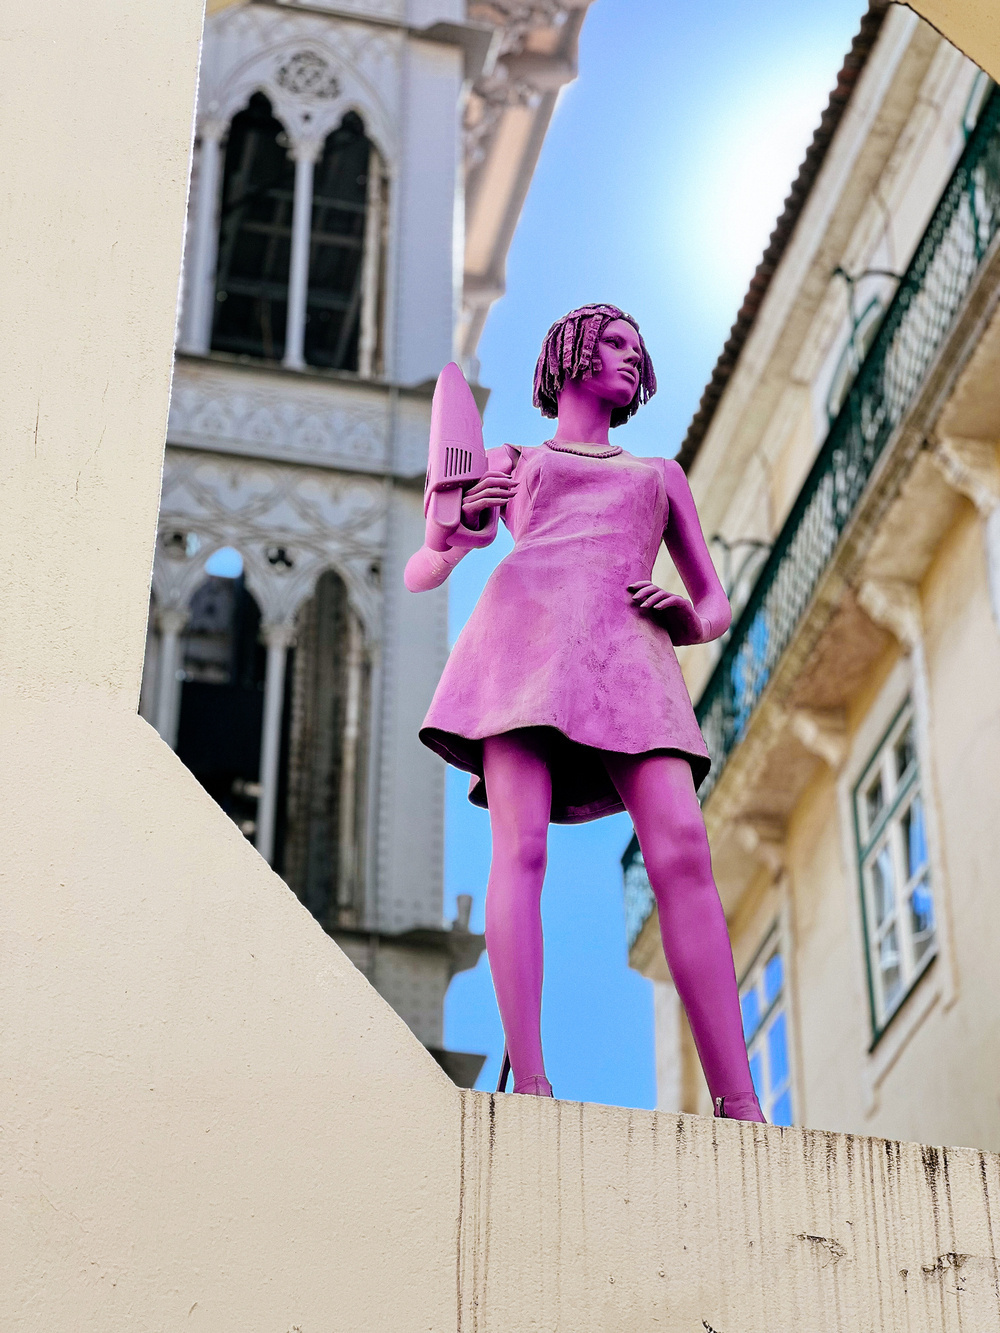 A pink statue of a woman holding a hairdryer stands on a ledge against the backdrop of a historic building with ornate windows and a clear blue sky.